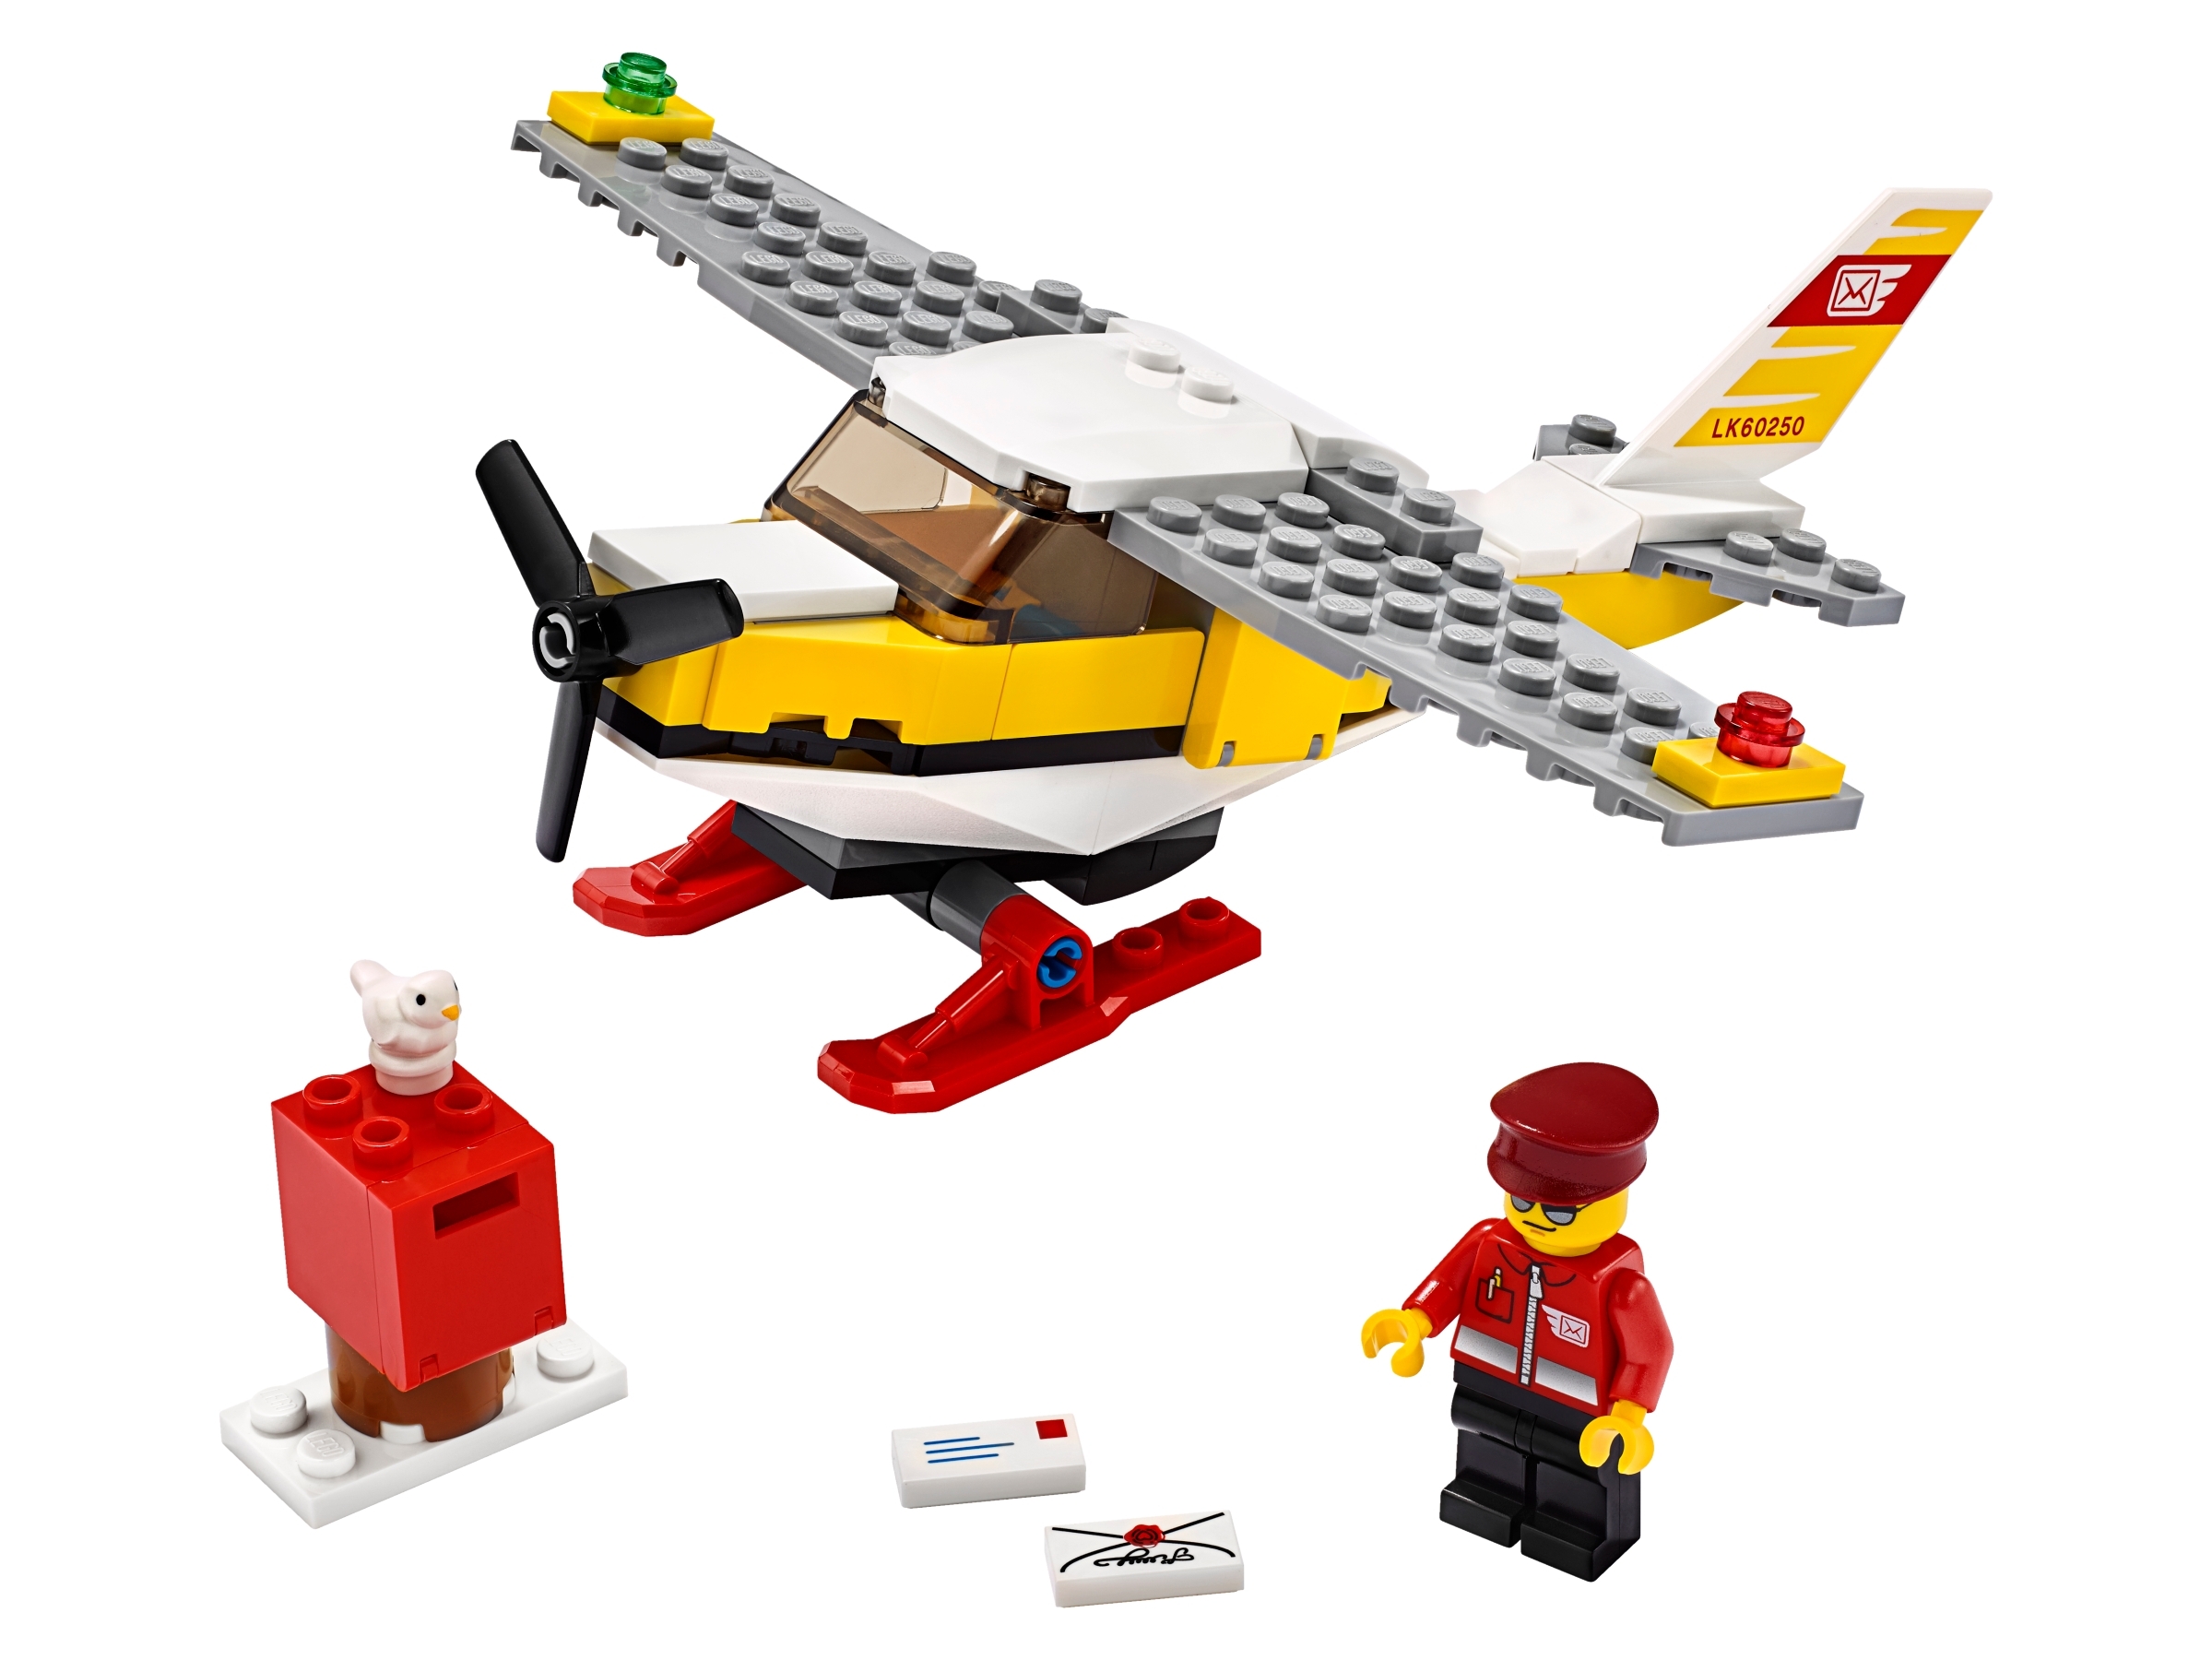 Mail Plane 60250 | City | Buy online the LEGO® US